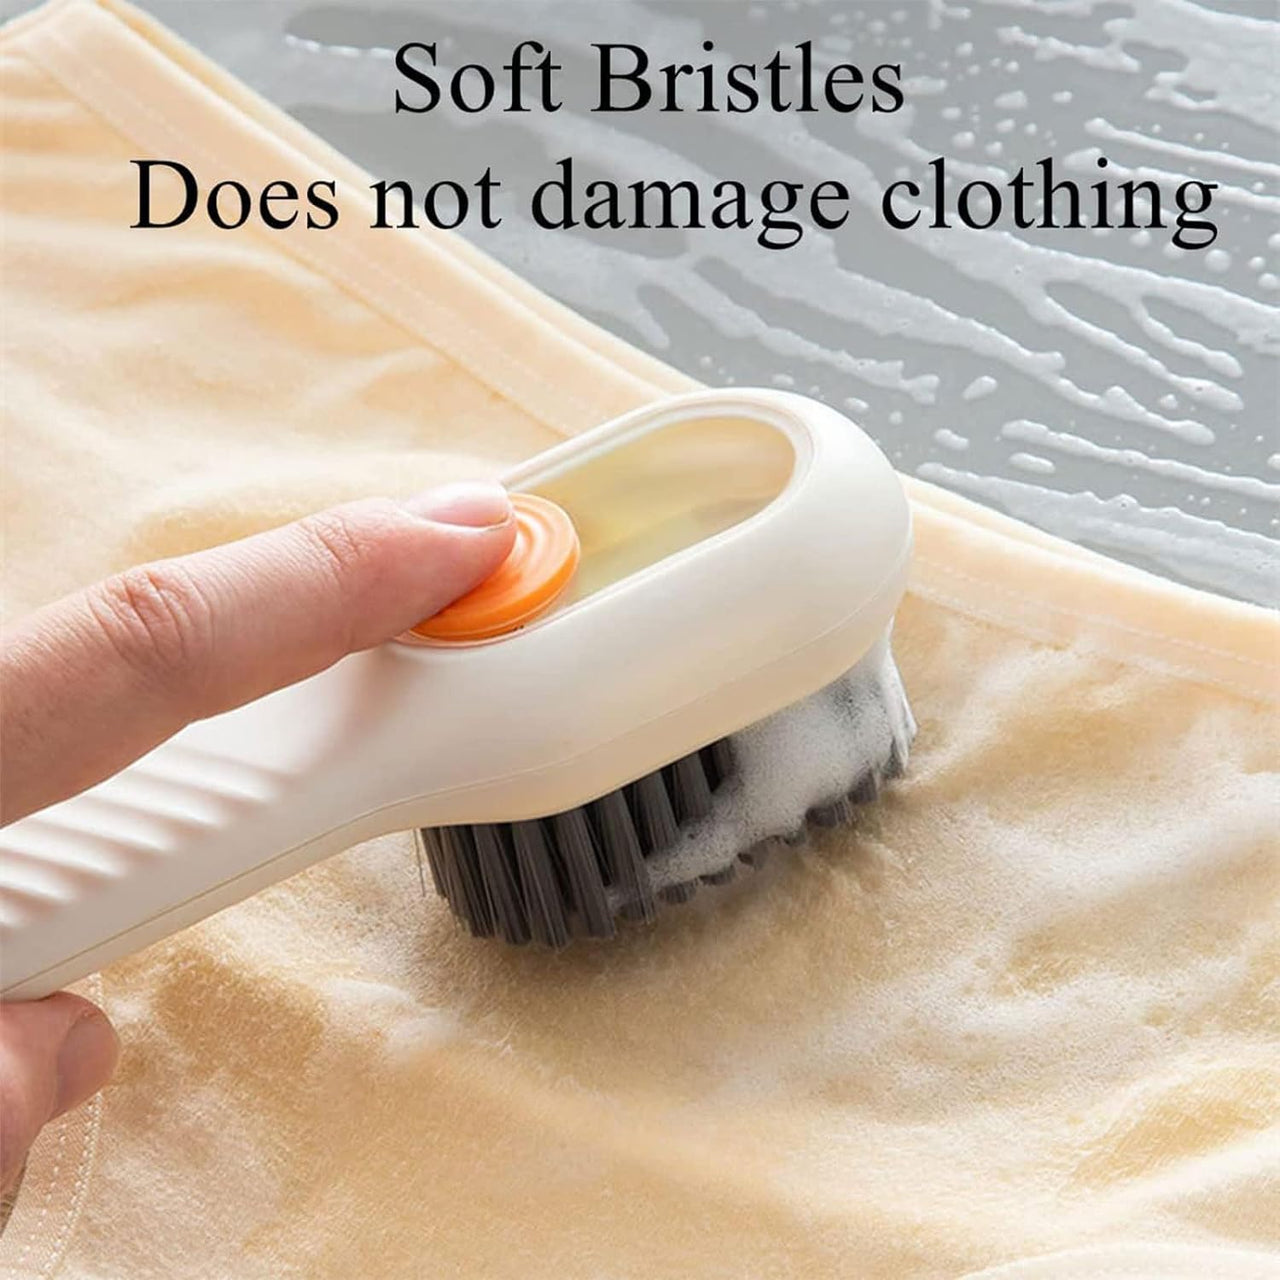 Multifunctional Soft Brush With Cleaning Liquid Adding